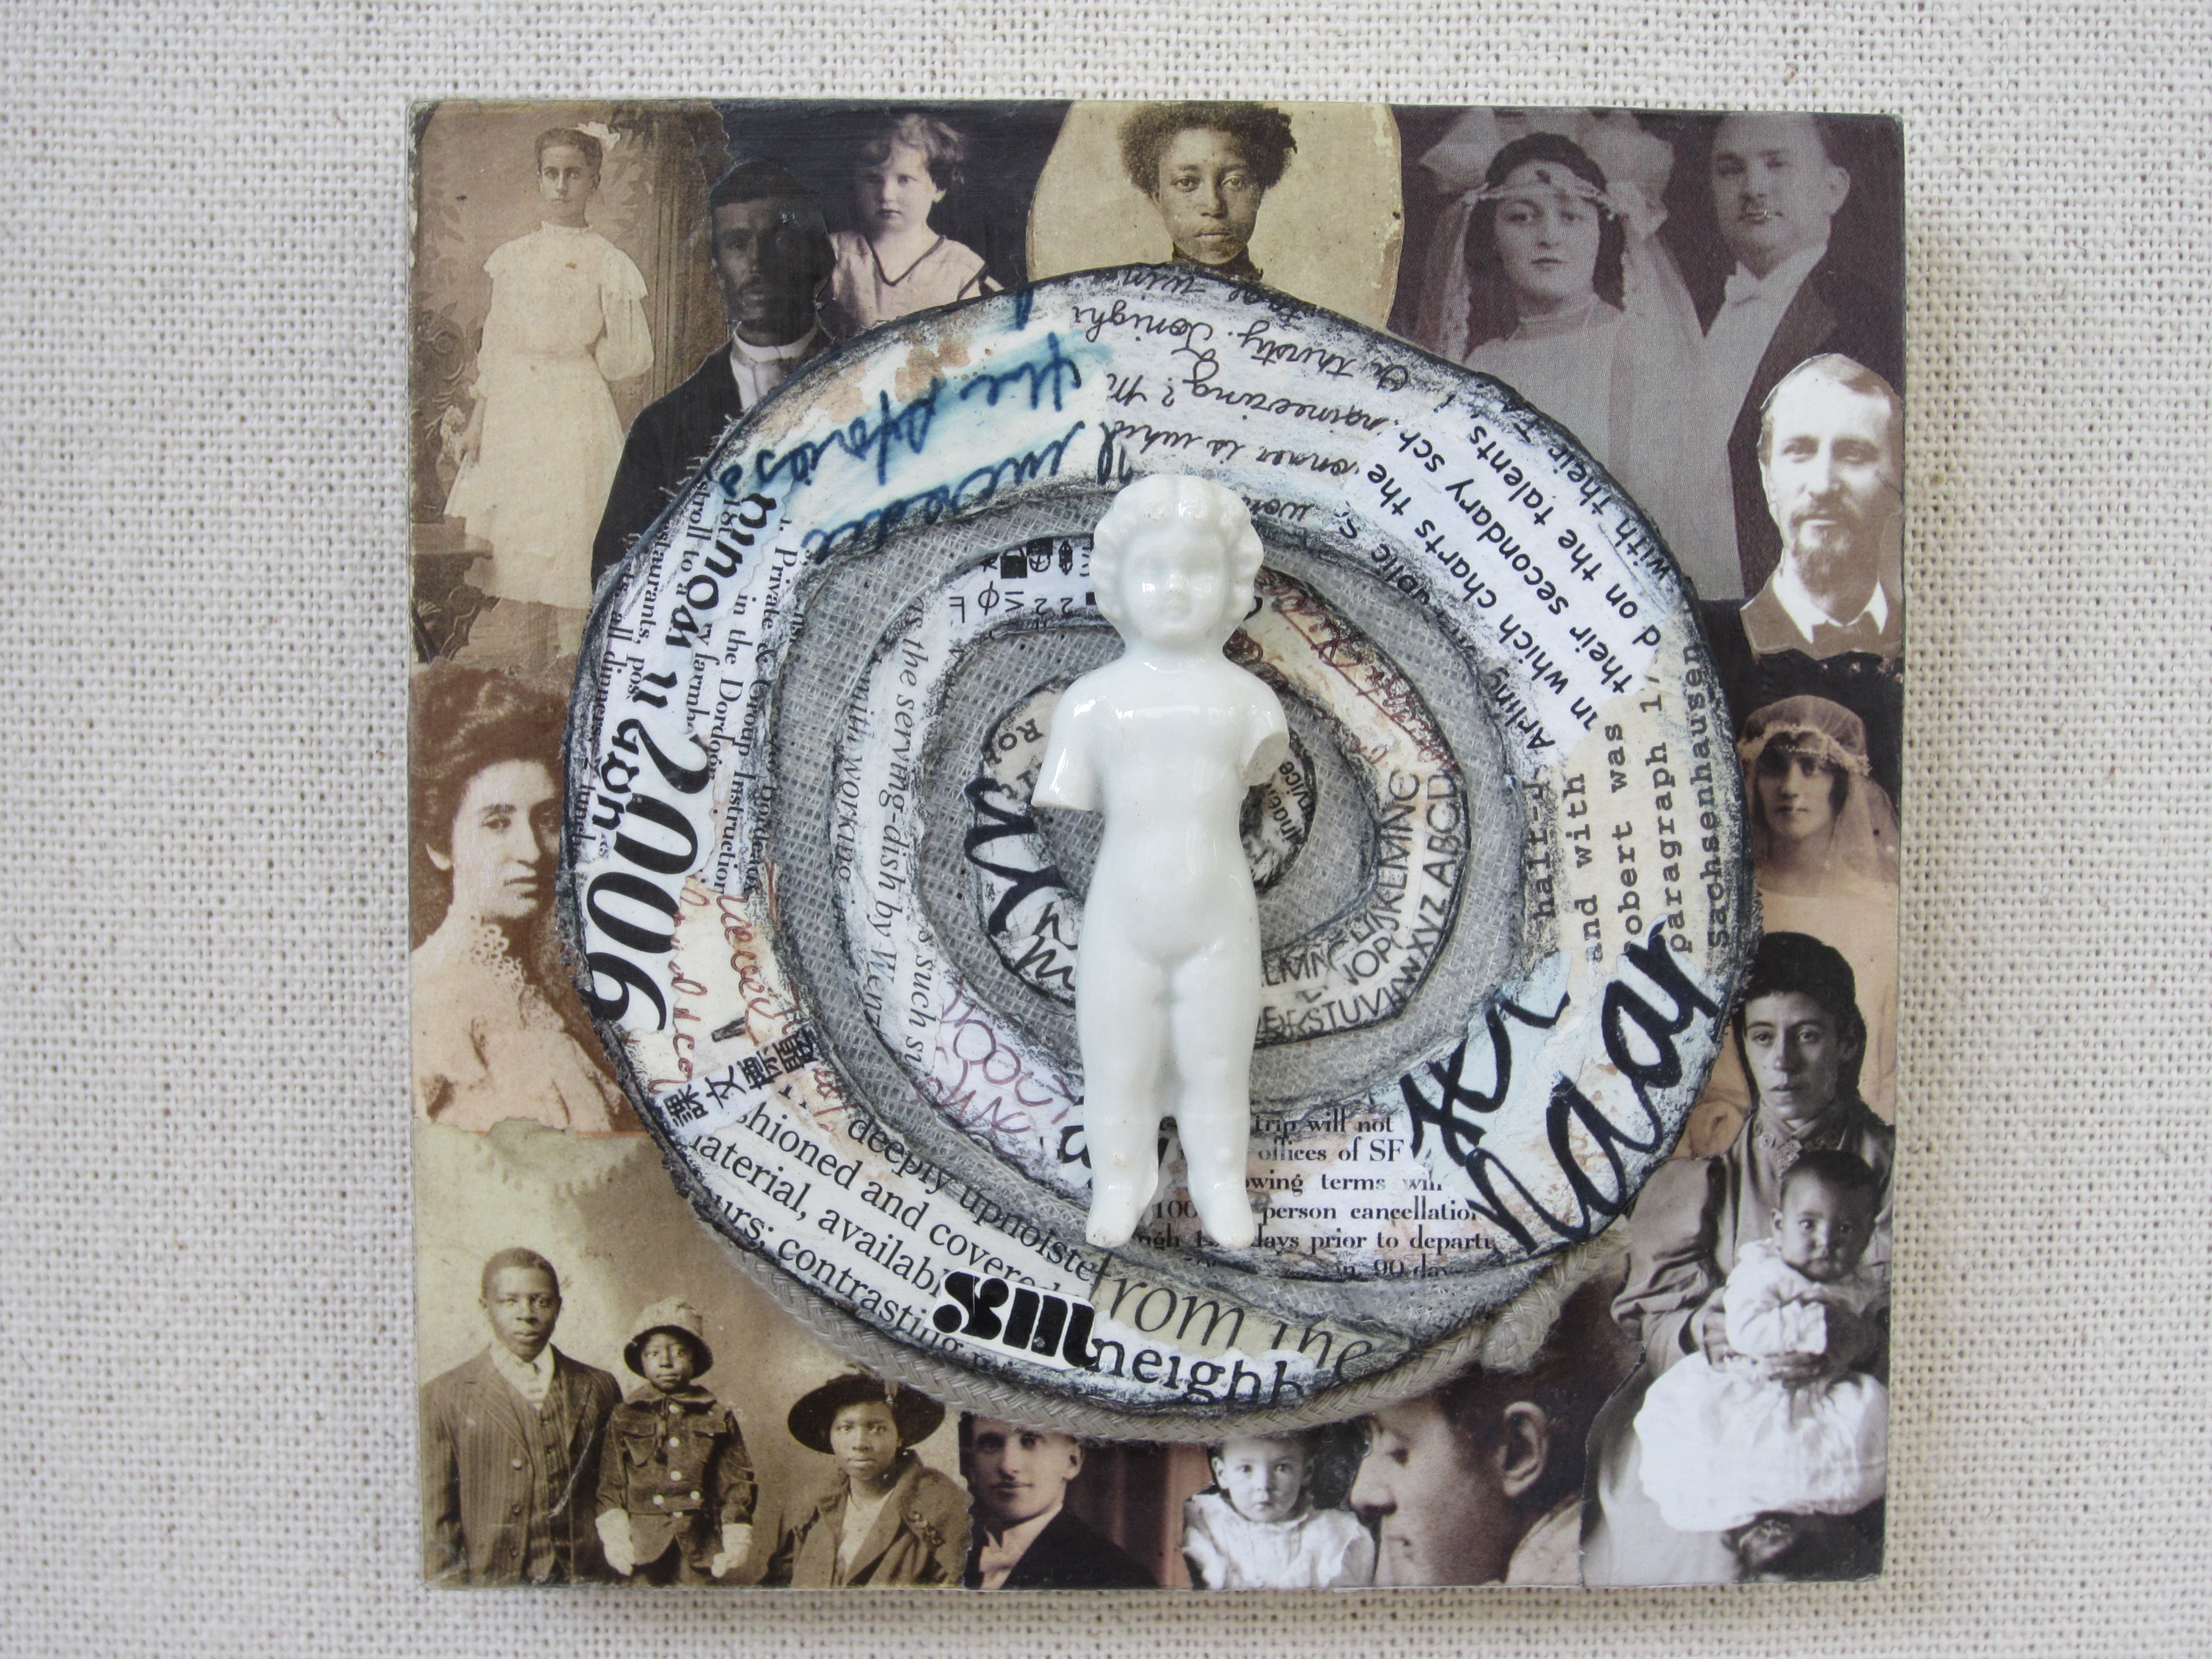 Generations, mixed media collage, 6"x 6"x 2"